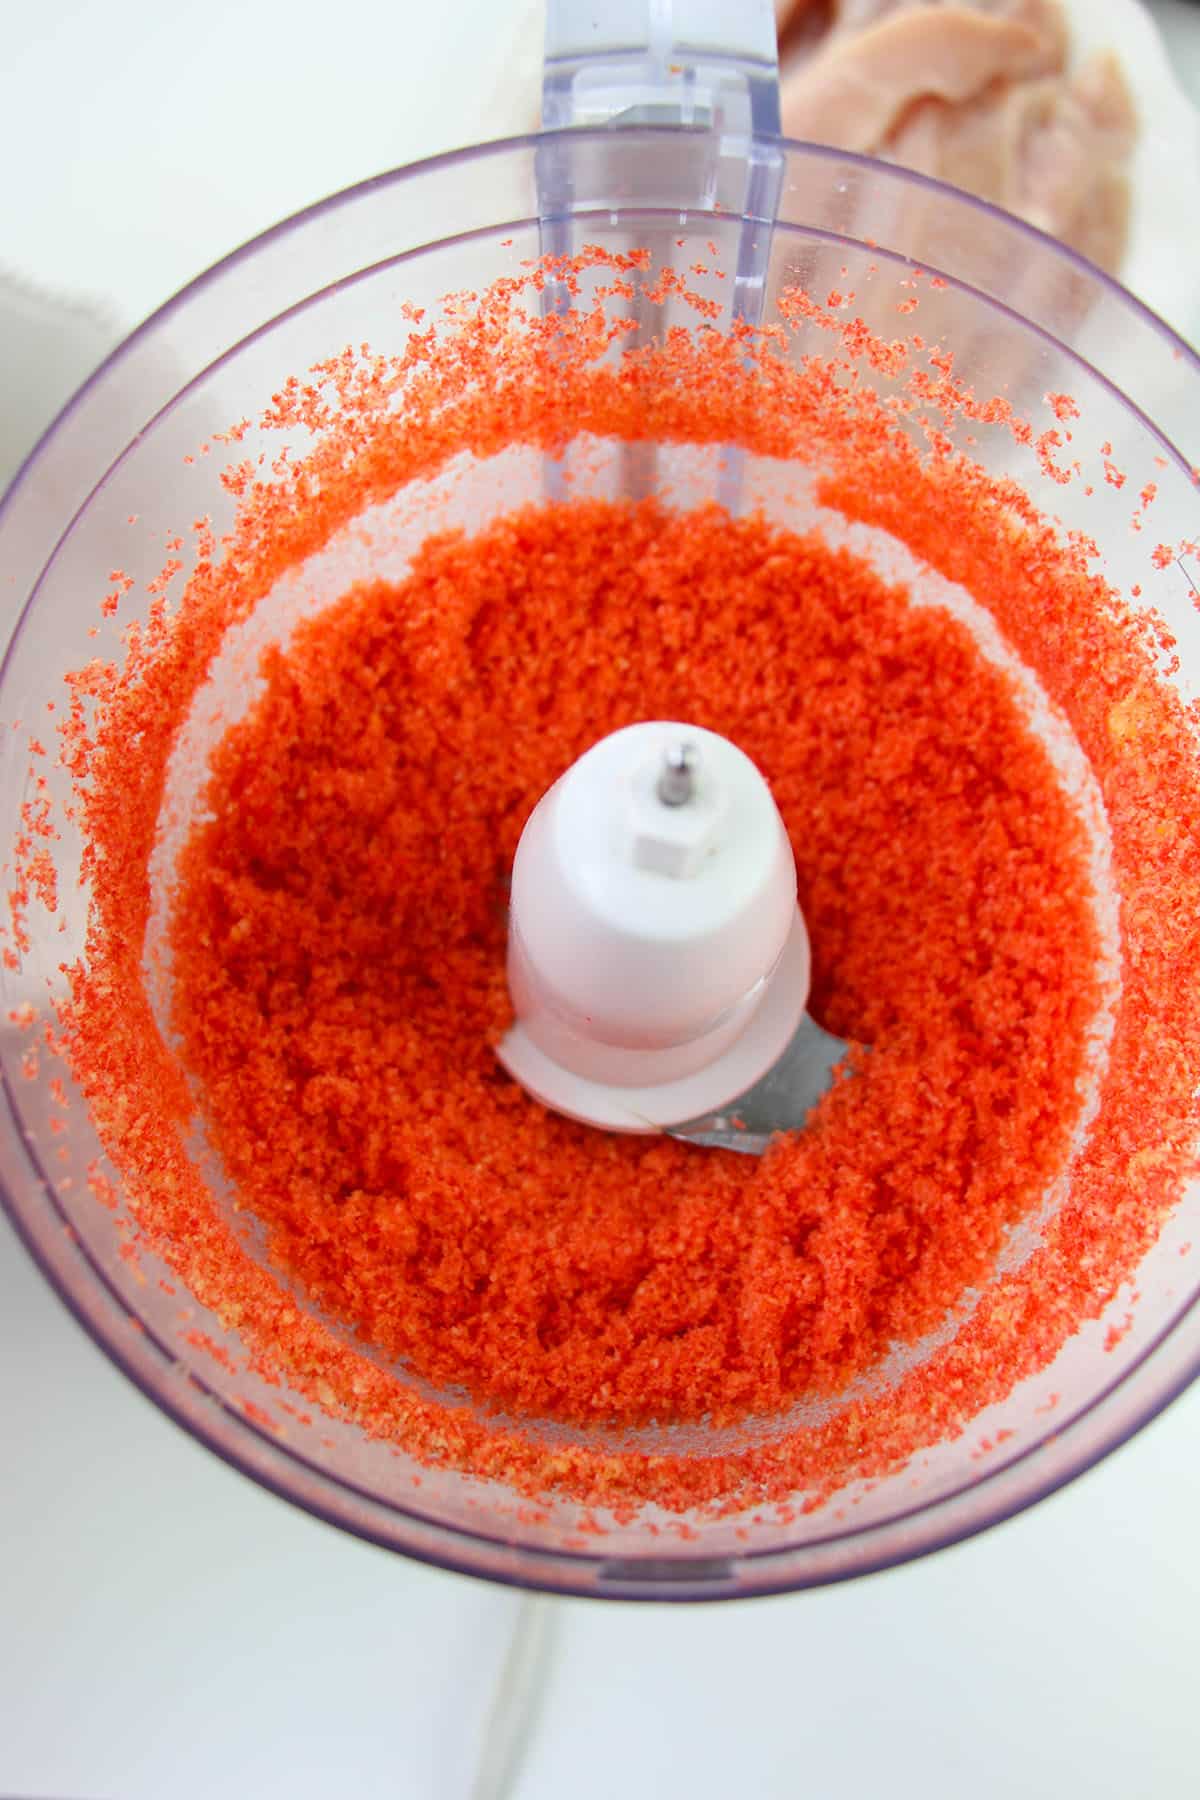 Crushed hot cheetos in a food processor